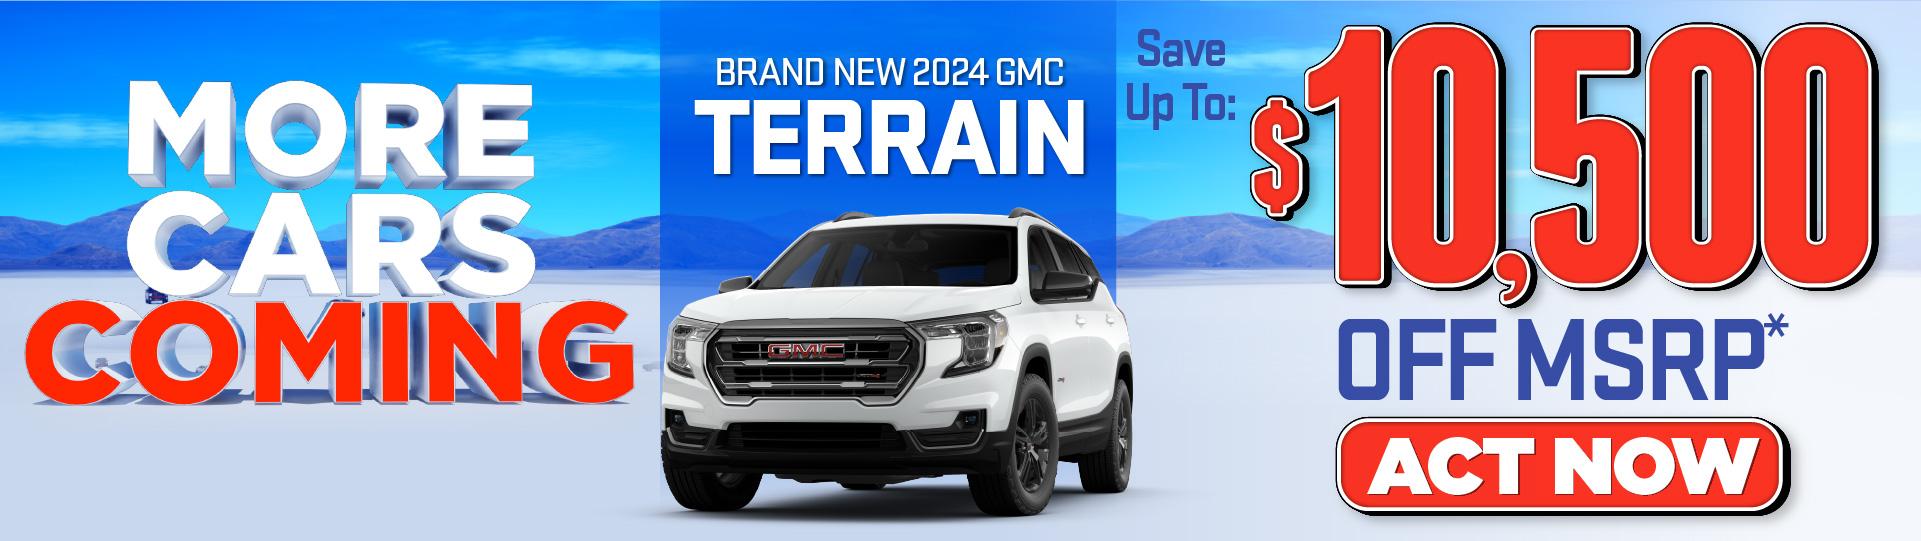 brand new GMC terrain save up to $10,500 off MSRP*